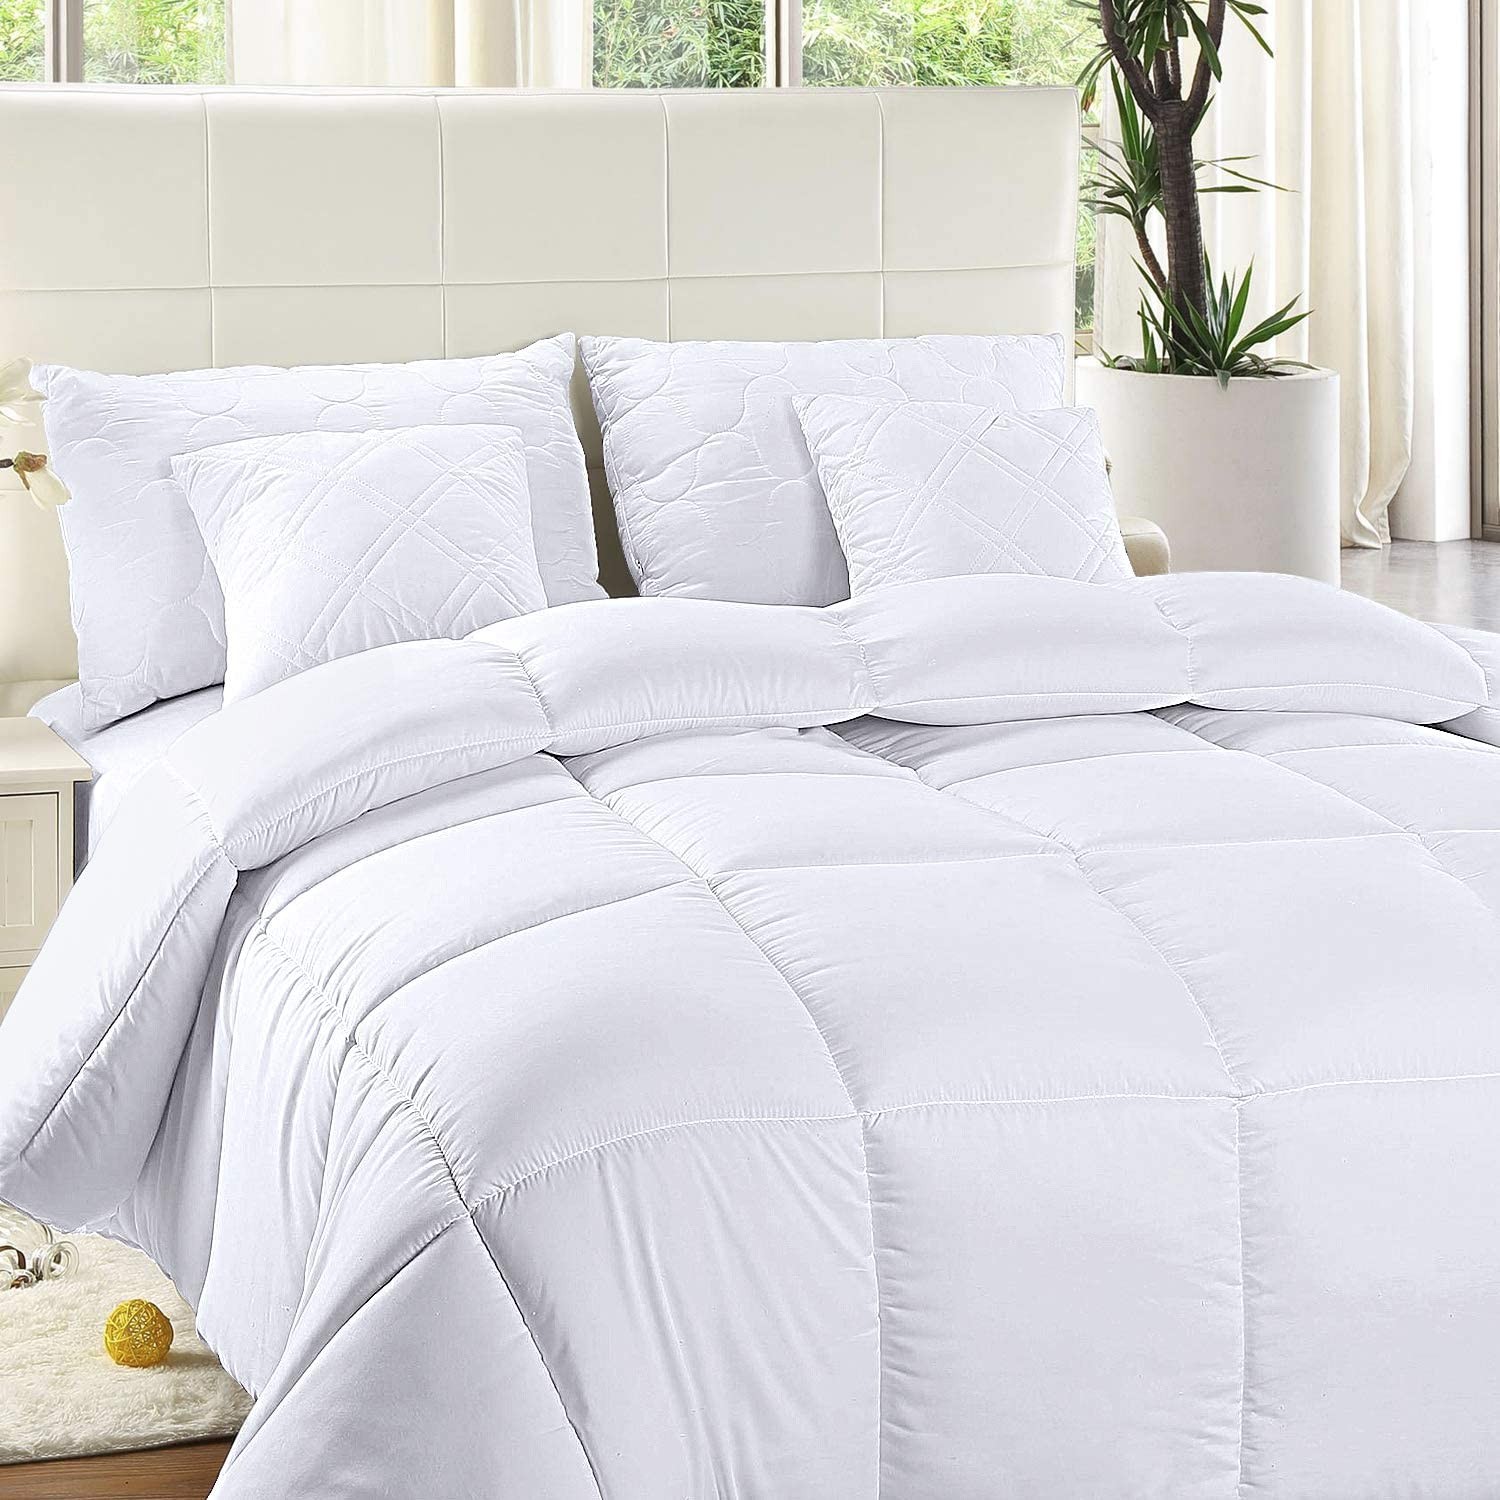 Manufacture High Quality bed in a bag comforter sets New Arrivals comforter